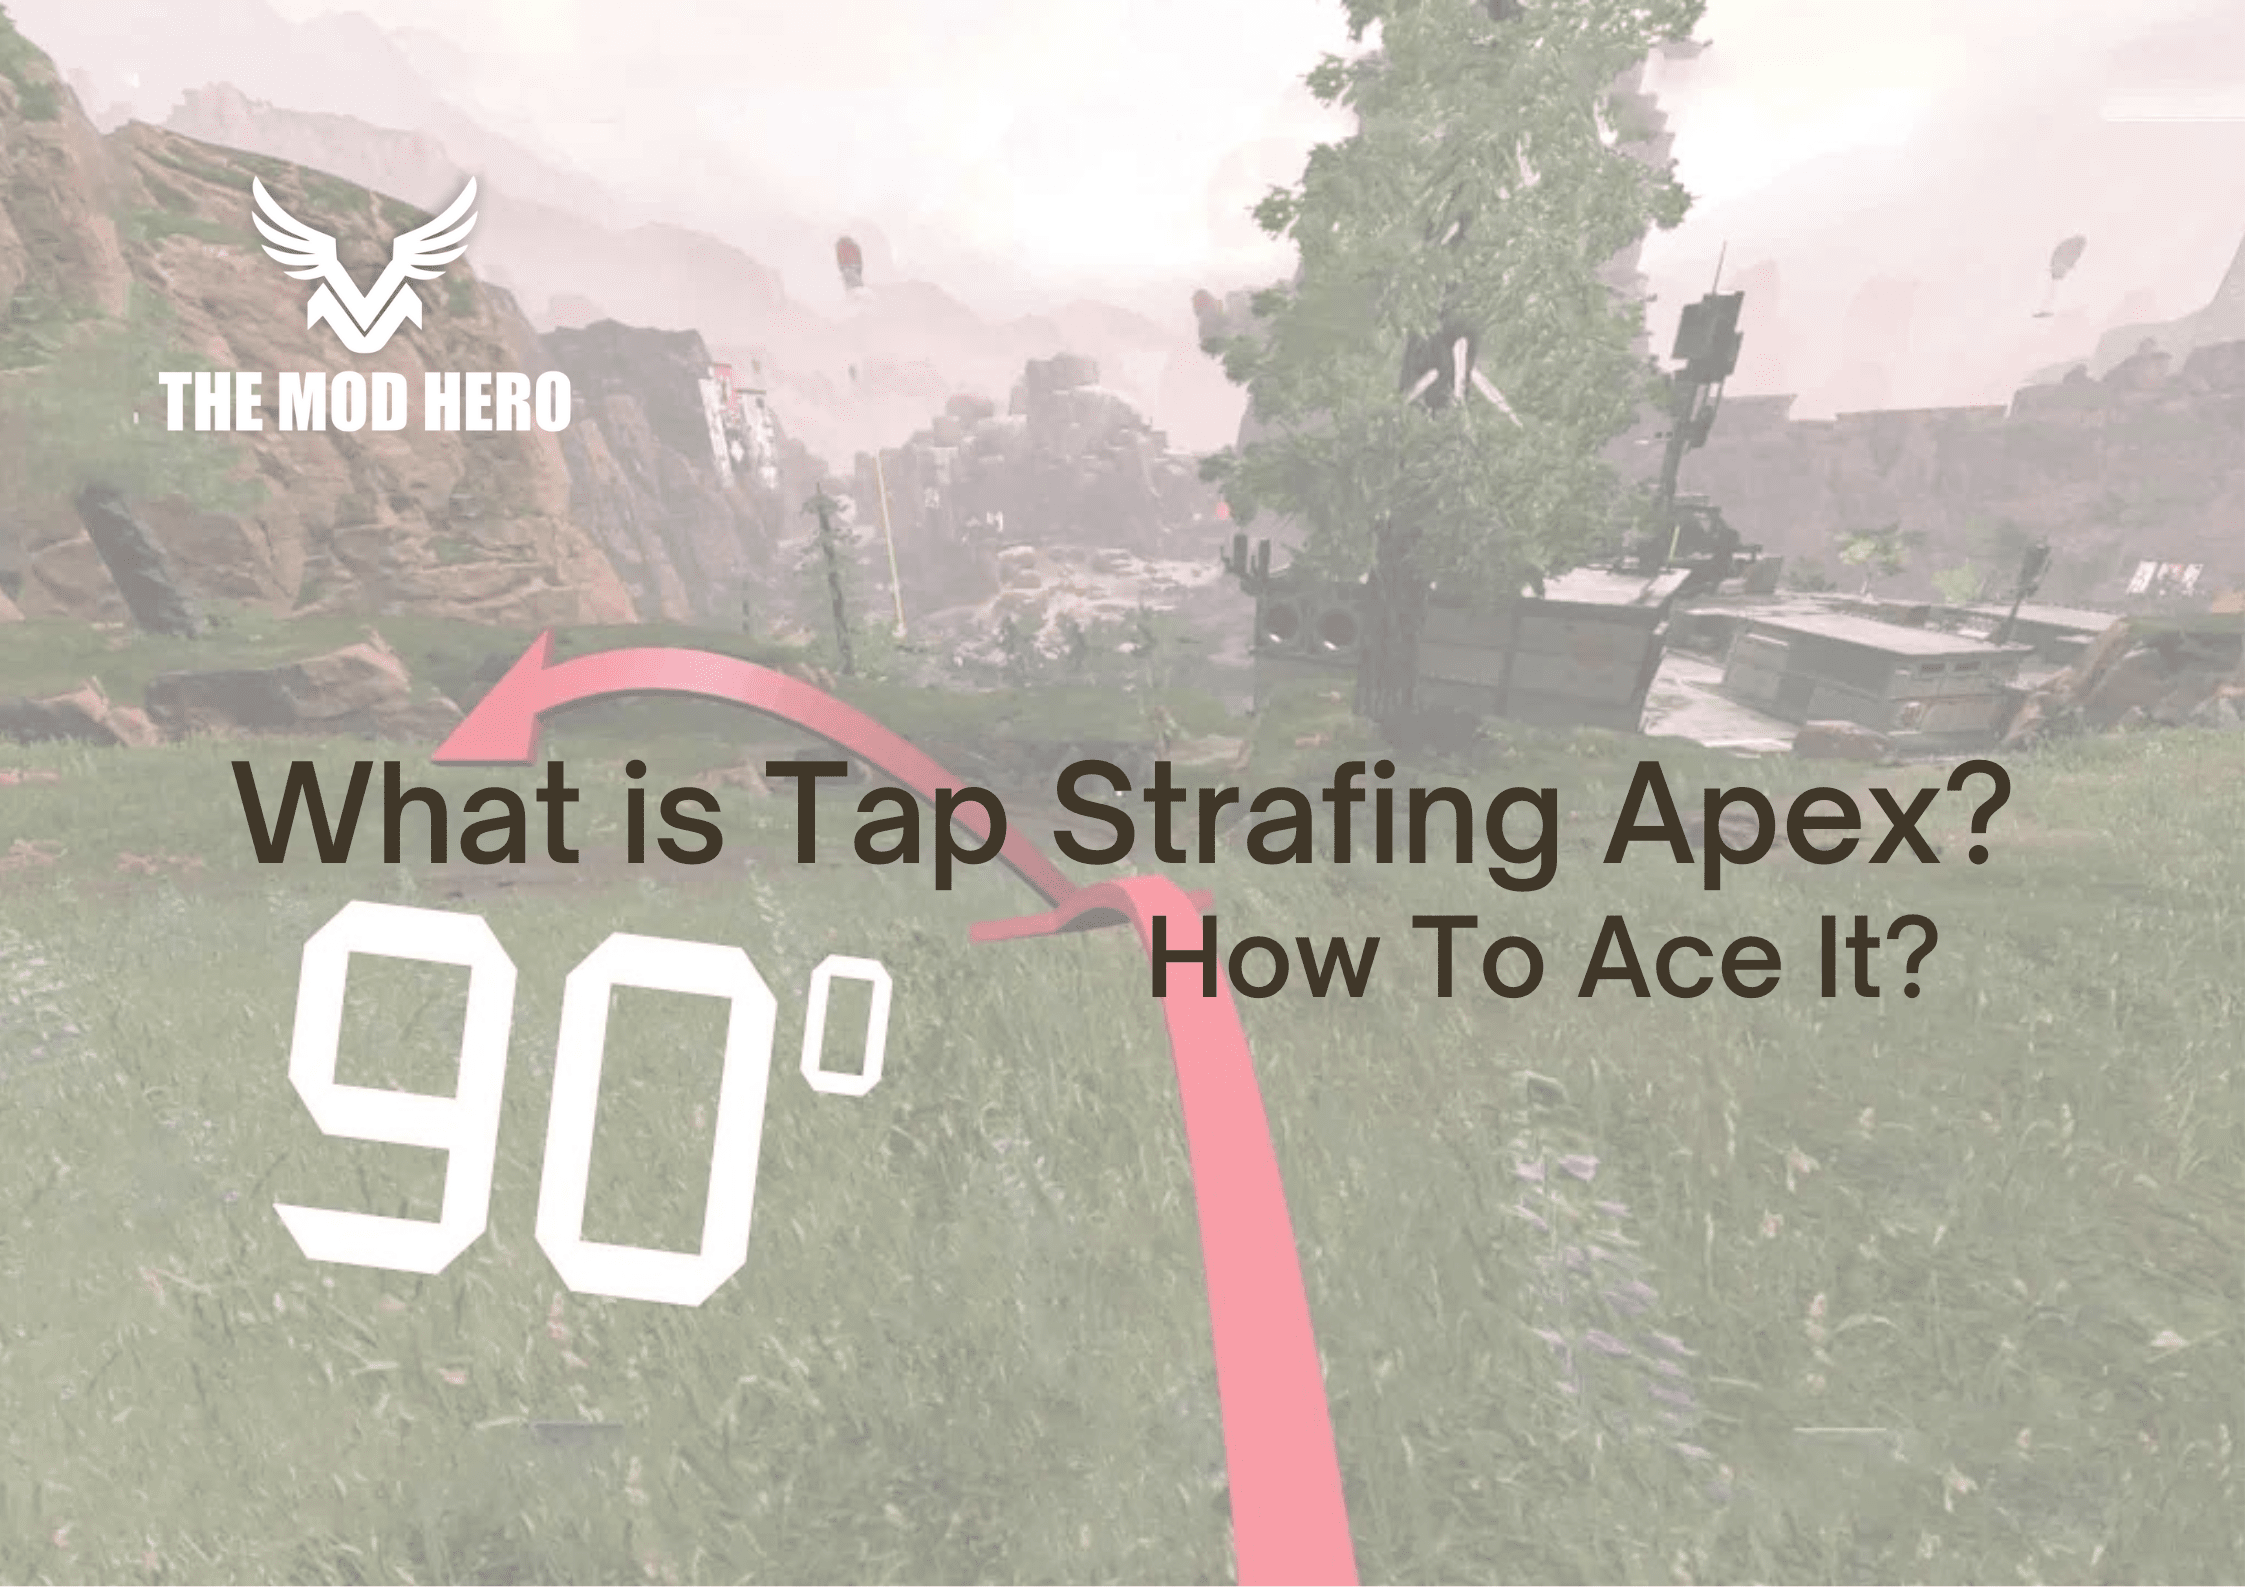 What is Tap Strafing Apex?